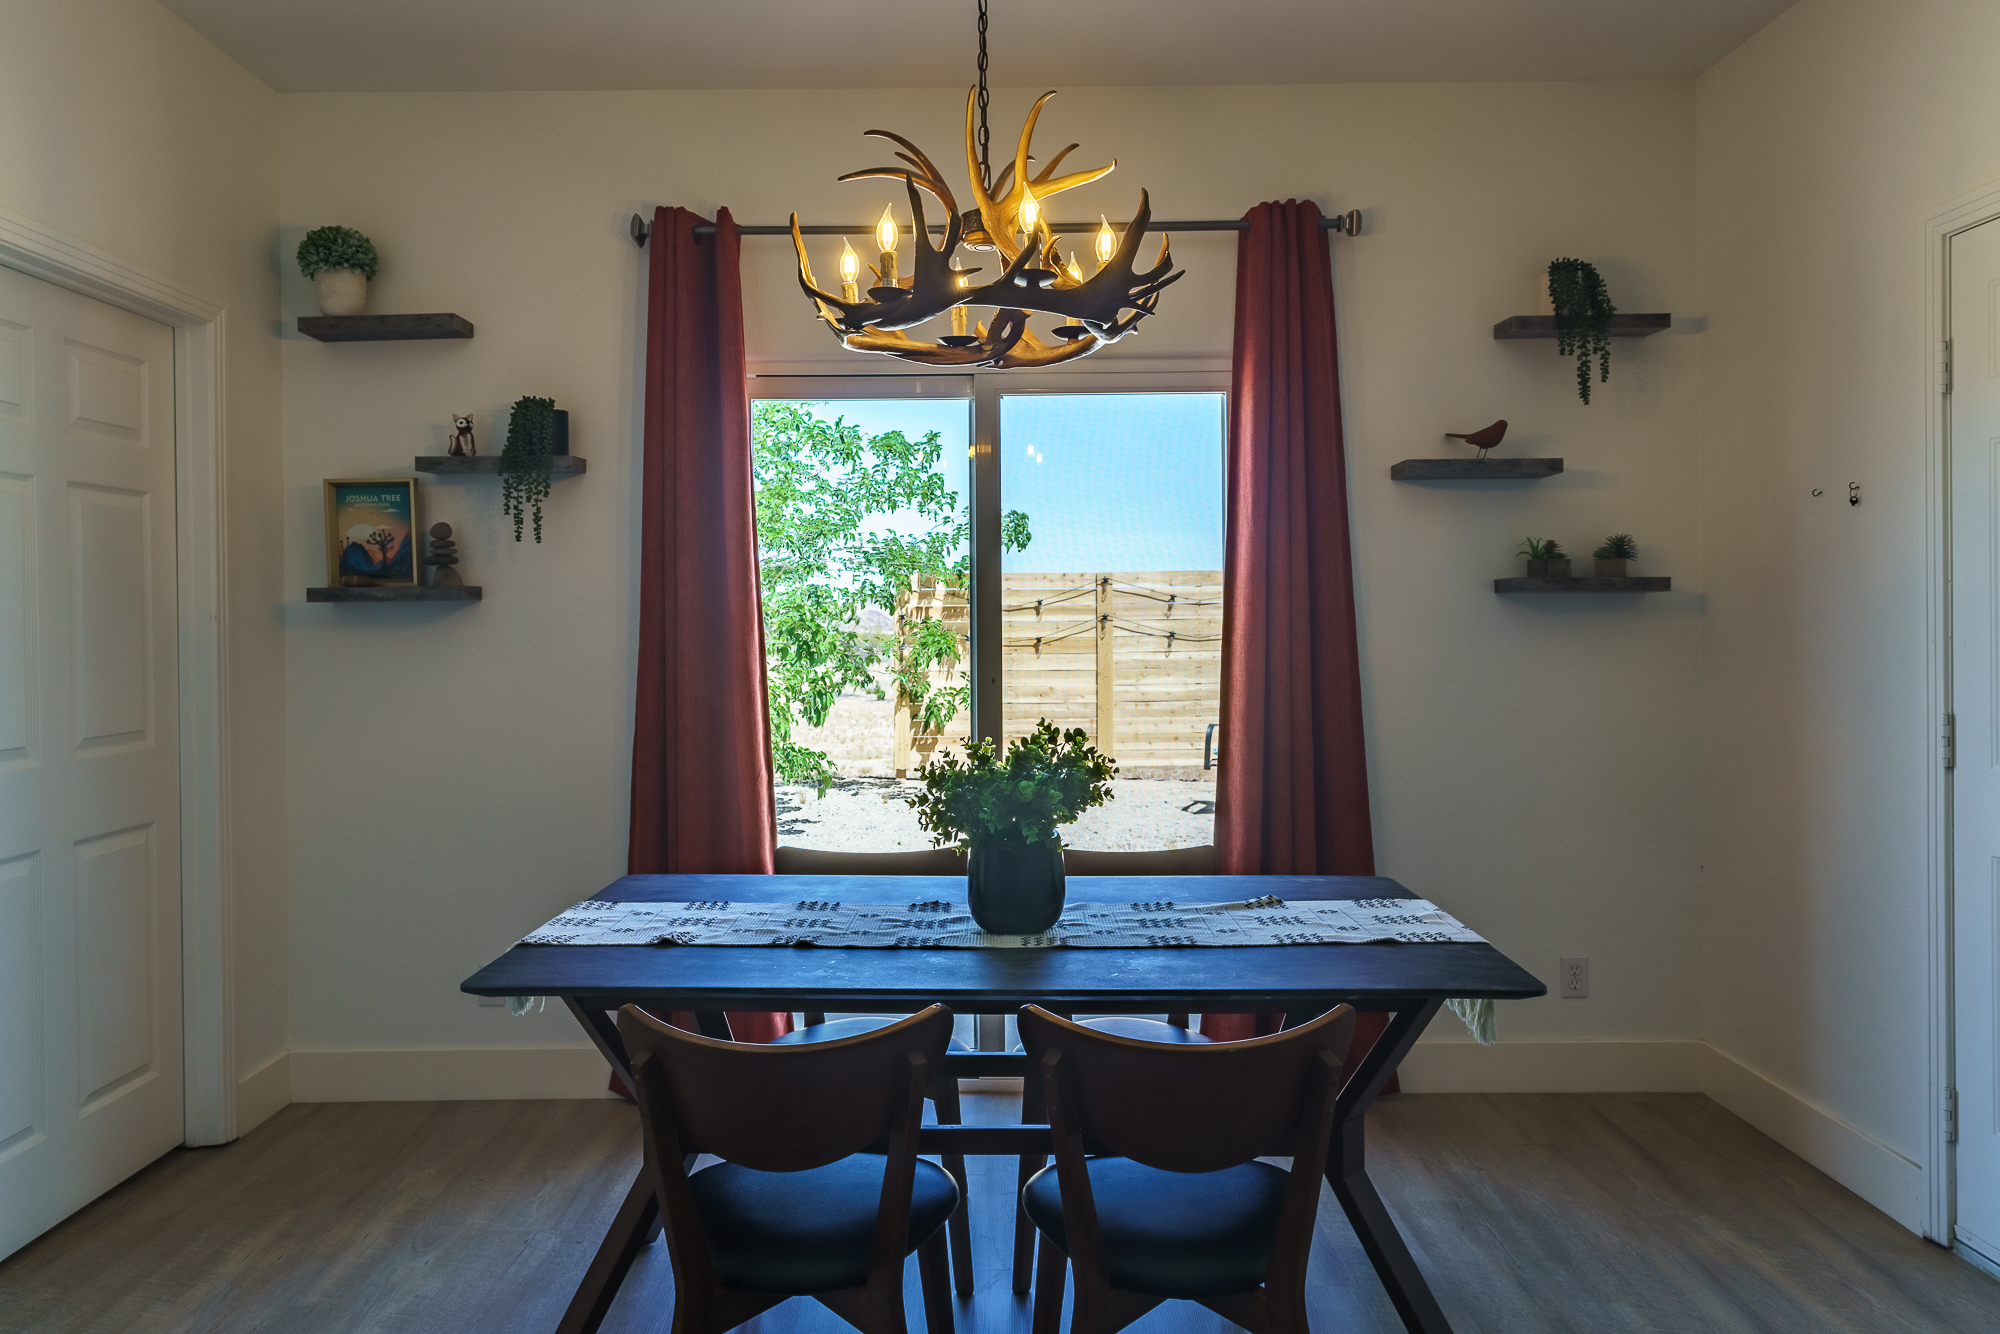 Dining Room with a view of the outdoors through the sliding glass door.